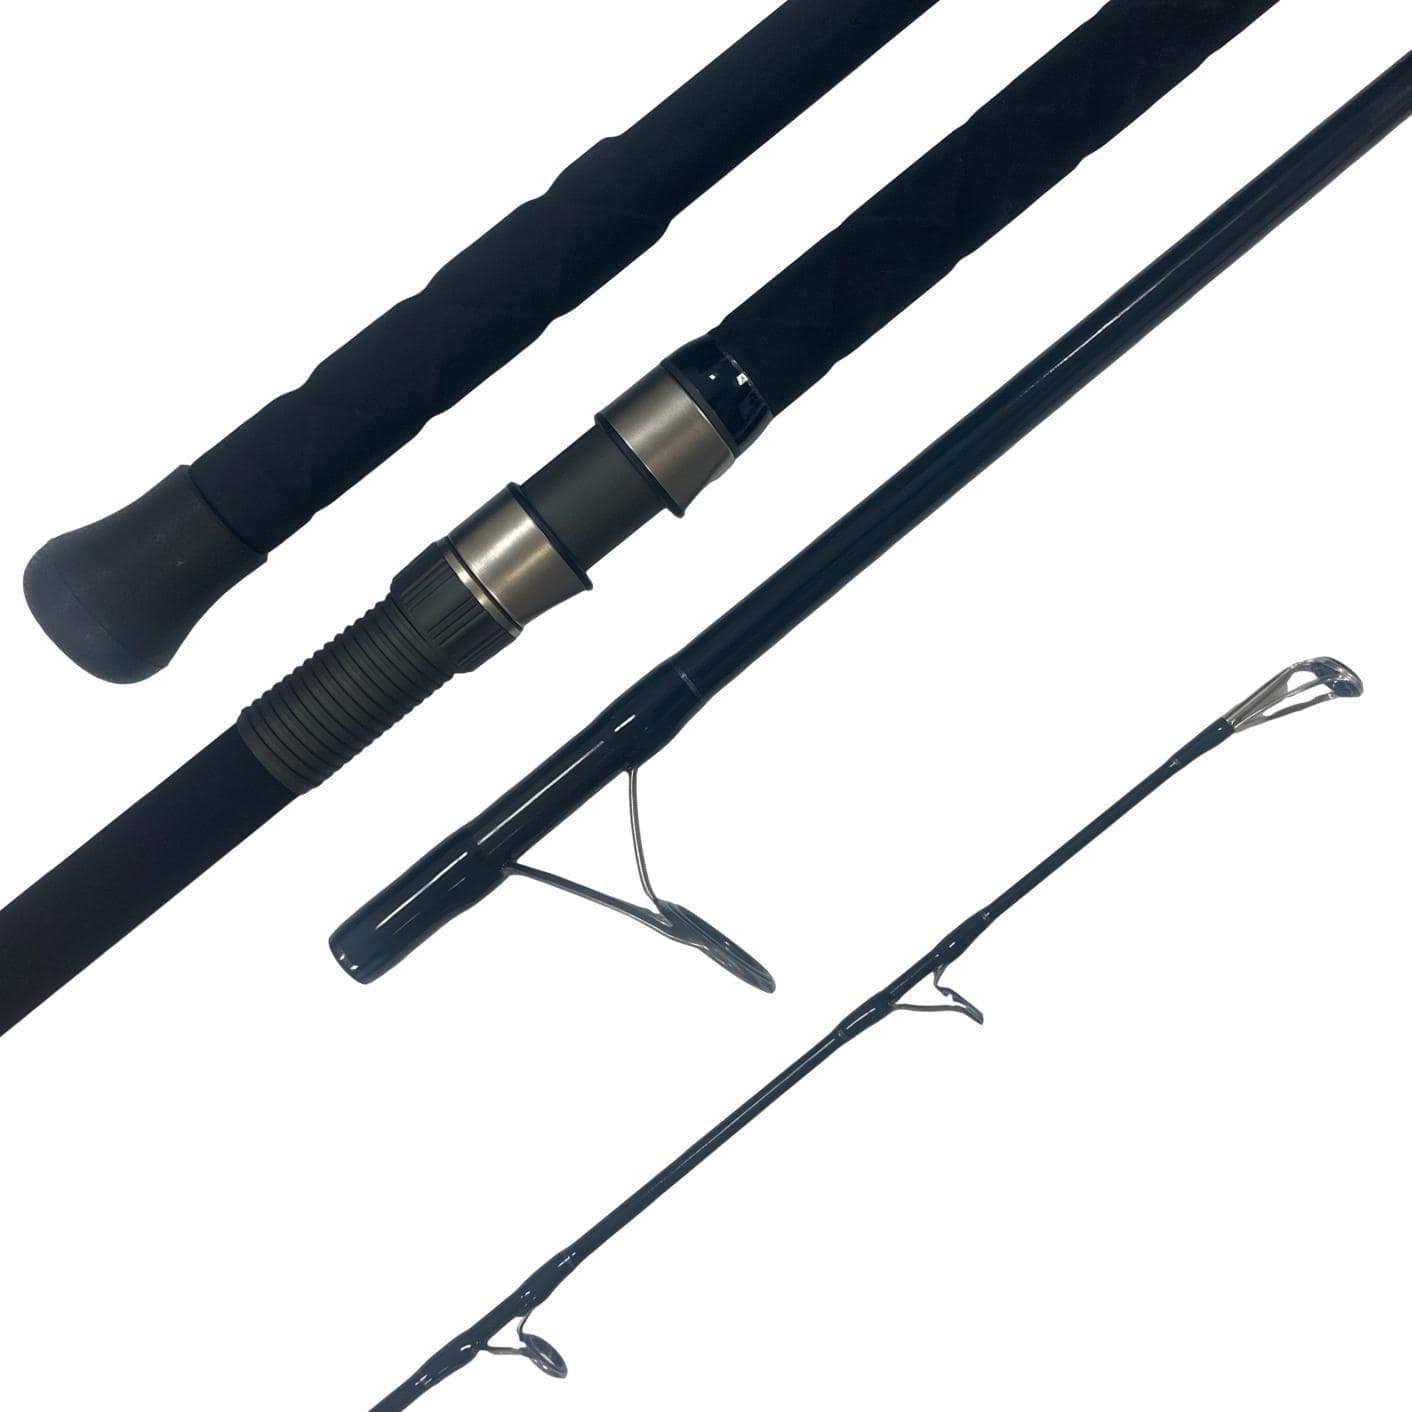 Travel Rod & Reel Case - Custom Fly Rod Crafters